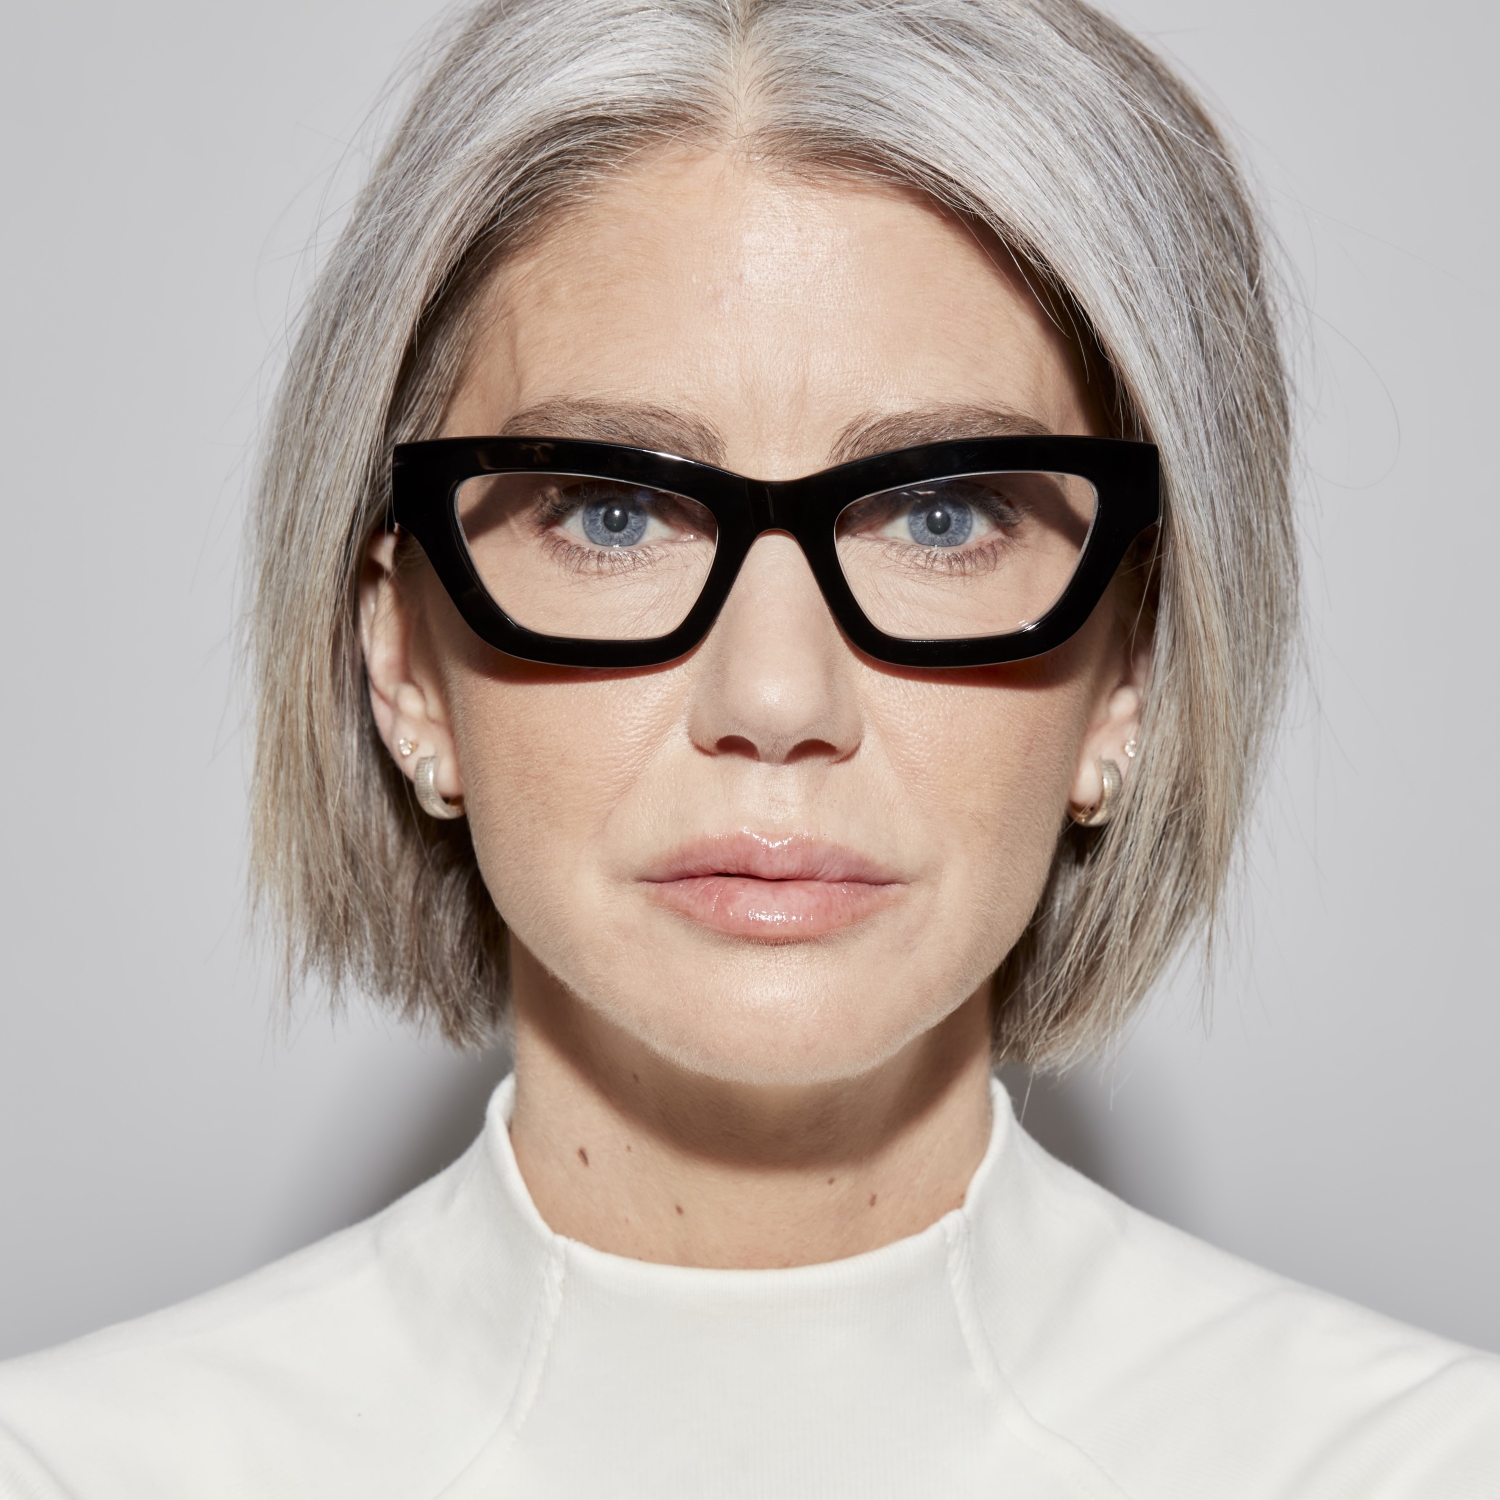 Photo of a man or woman wearing Jade Dark Tortoise Reading Glasses by French Kiwis